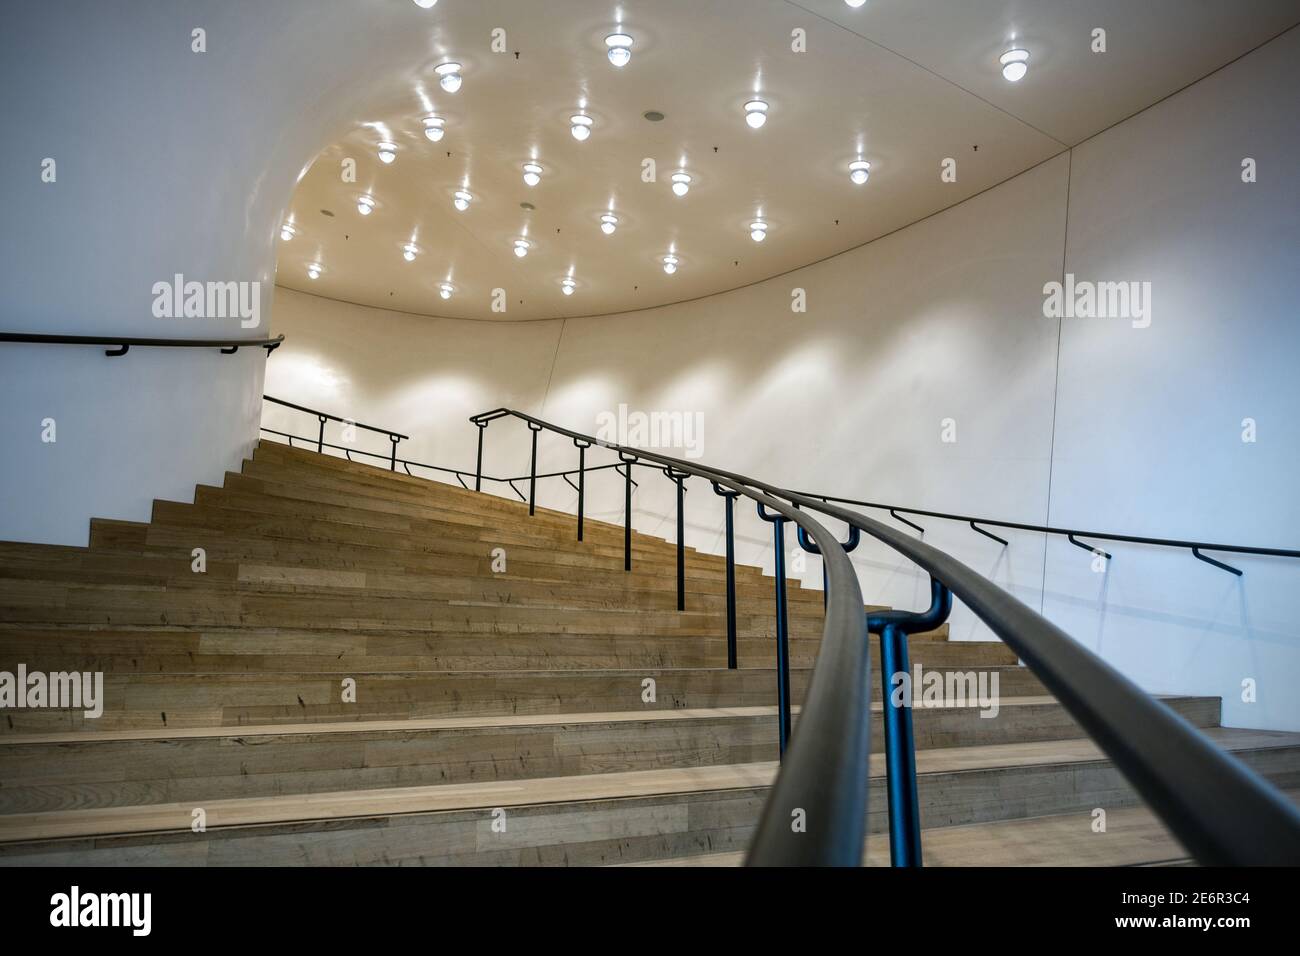 Stairway design inside the Elbphilharmonie, a concert hall in the HafenCity quarter of Hamburg, Germany, on the Grasbrook peninsula of the Elbe River Stock Photo